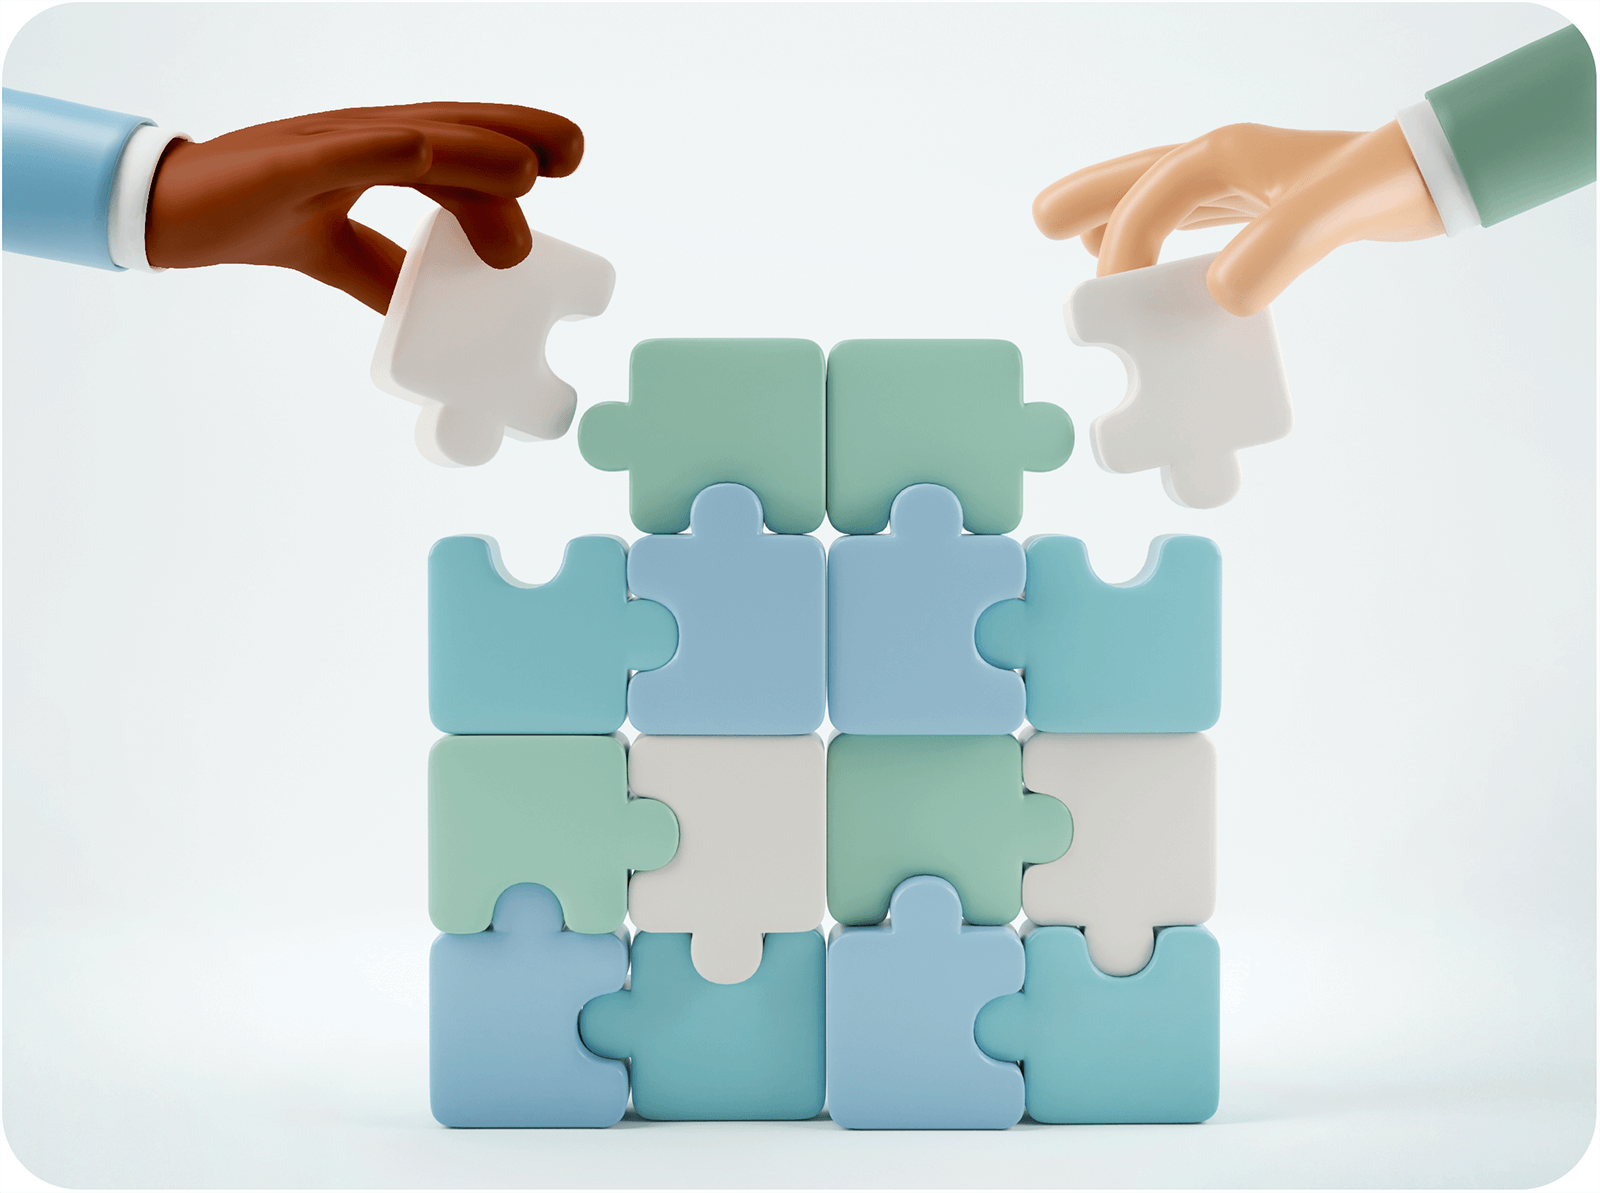 Cartoonish, 3D rendering of two hand placing puzzle pieces into a loosely fitting puzzle.